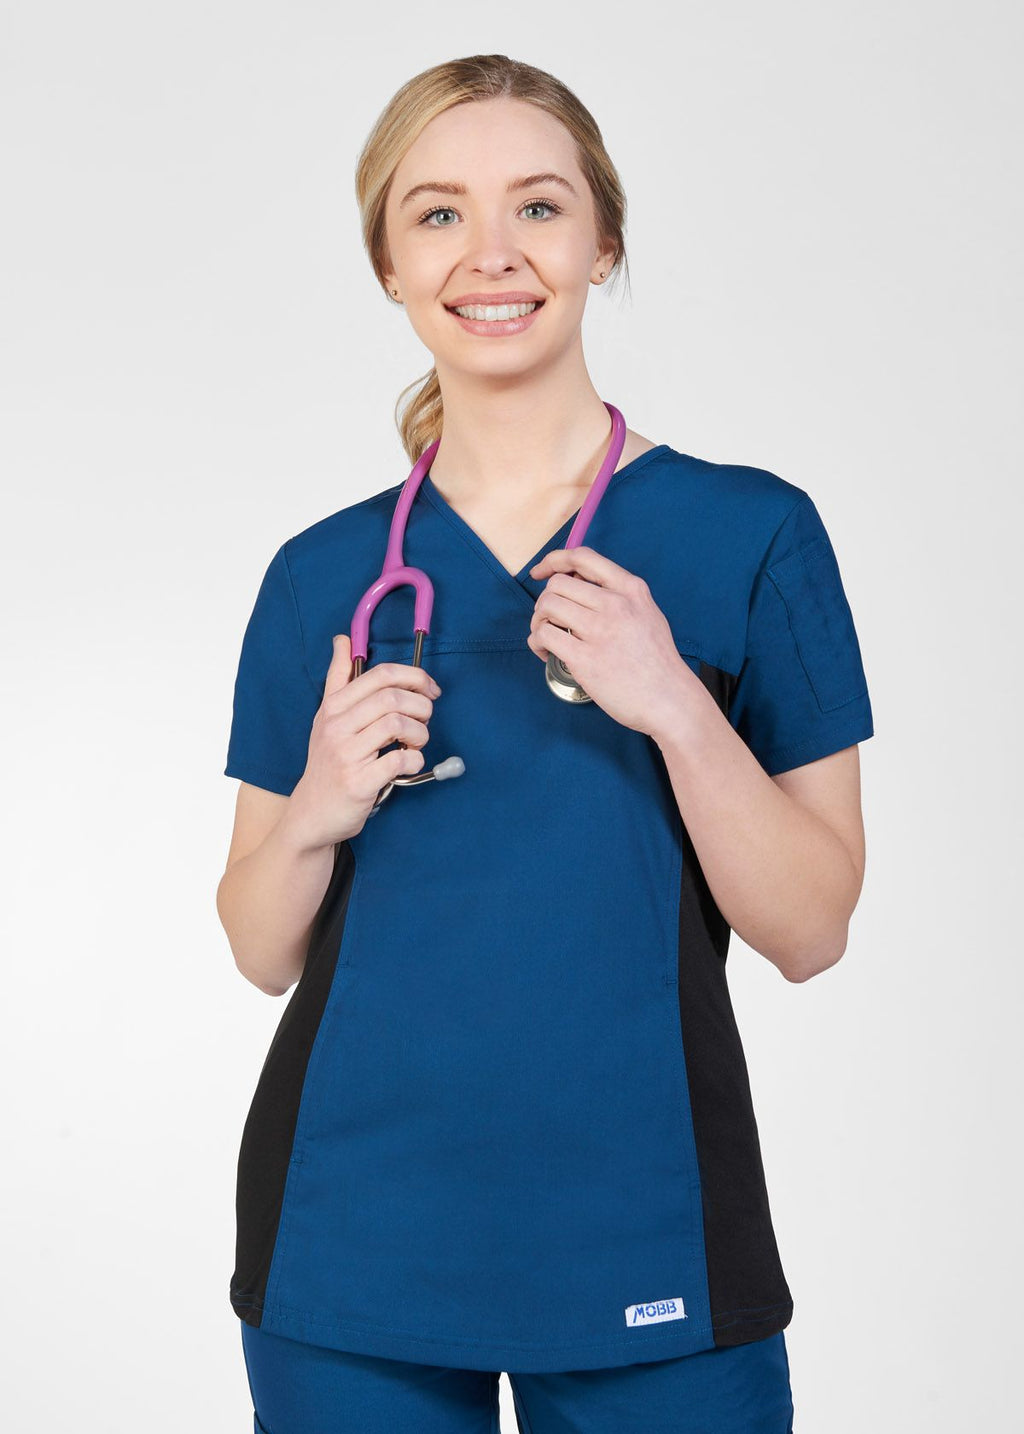 Mobb Flexi V-Neck Scrub Top- Save $5 FOR A LIMITED TIME!